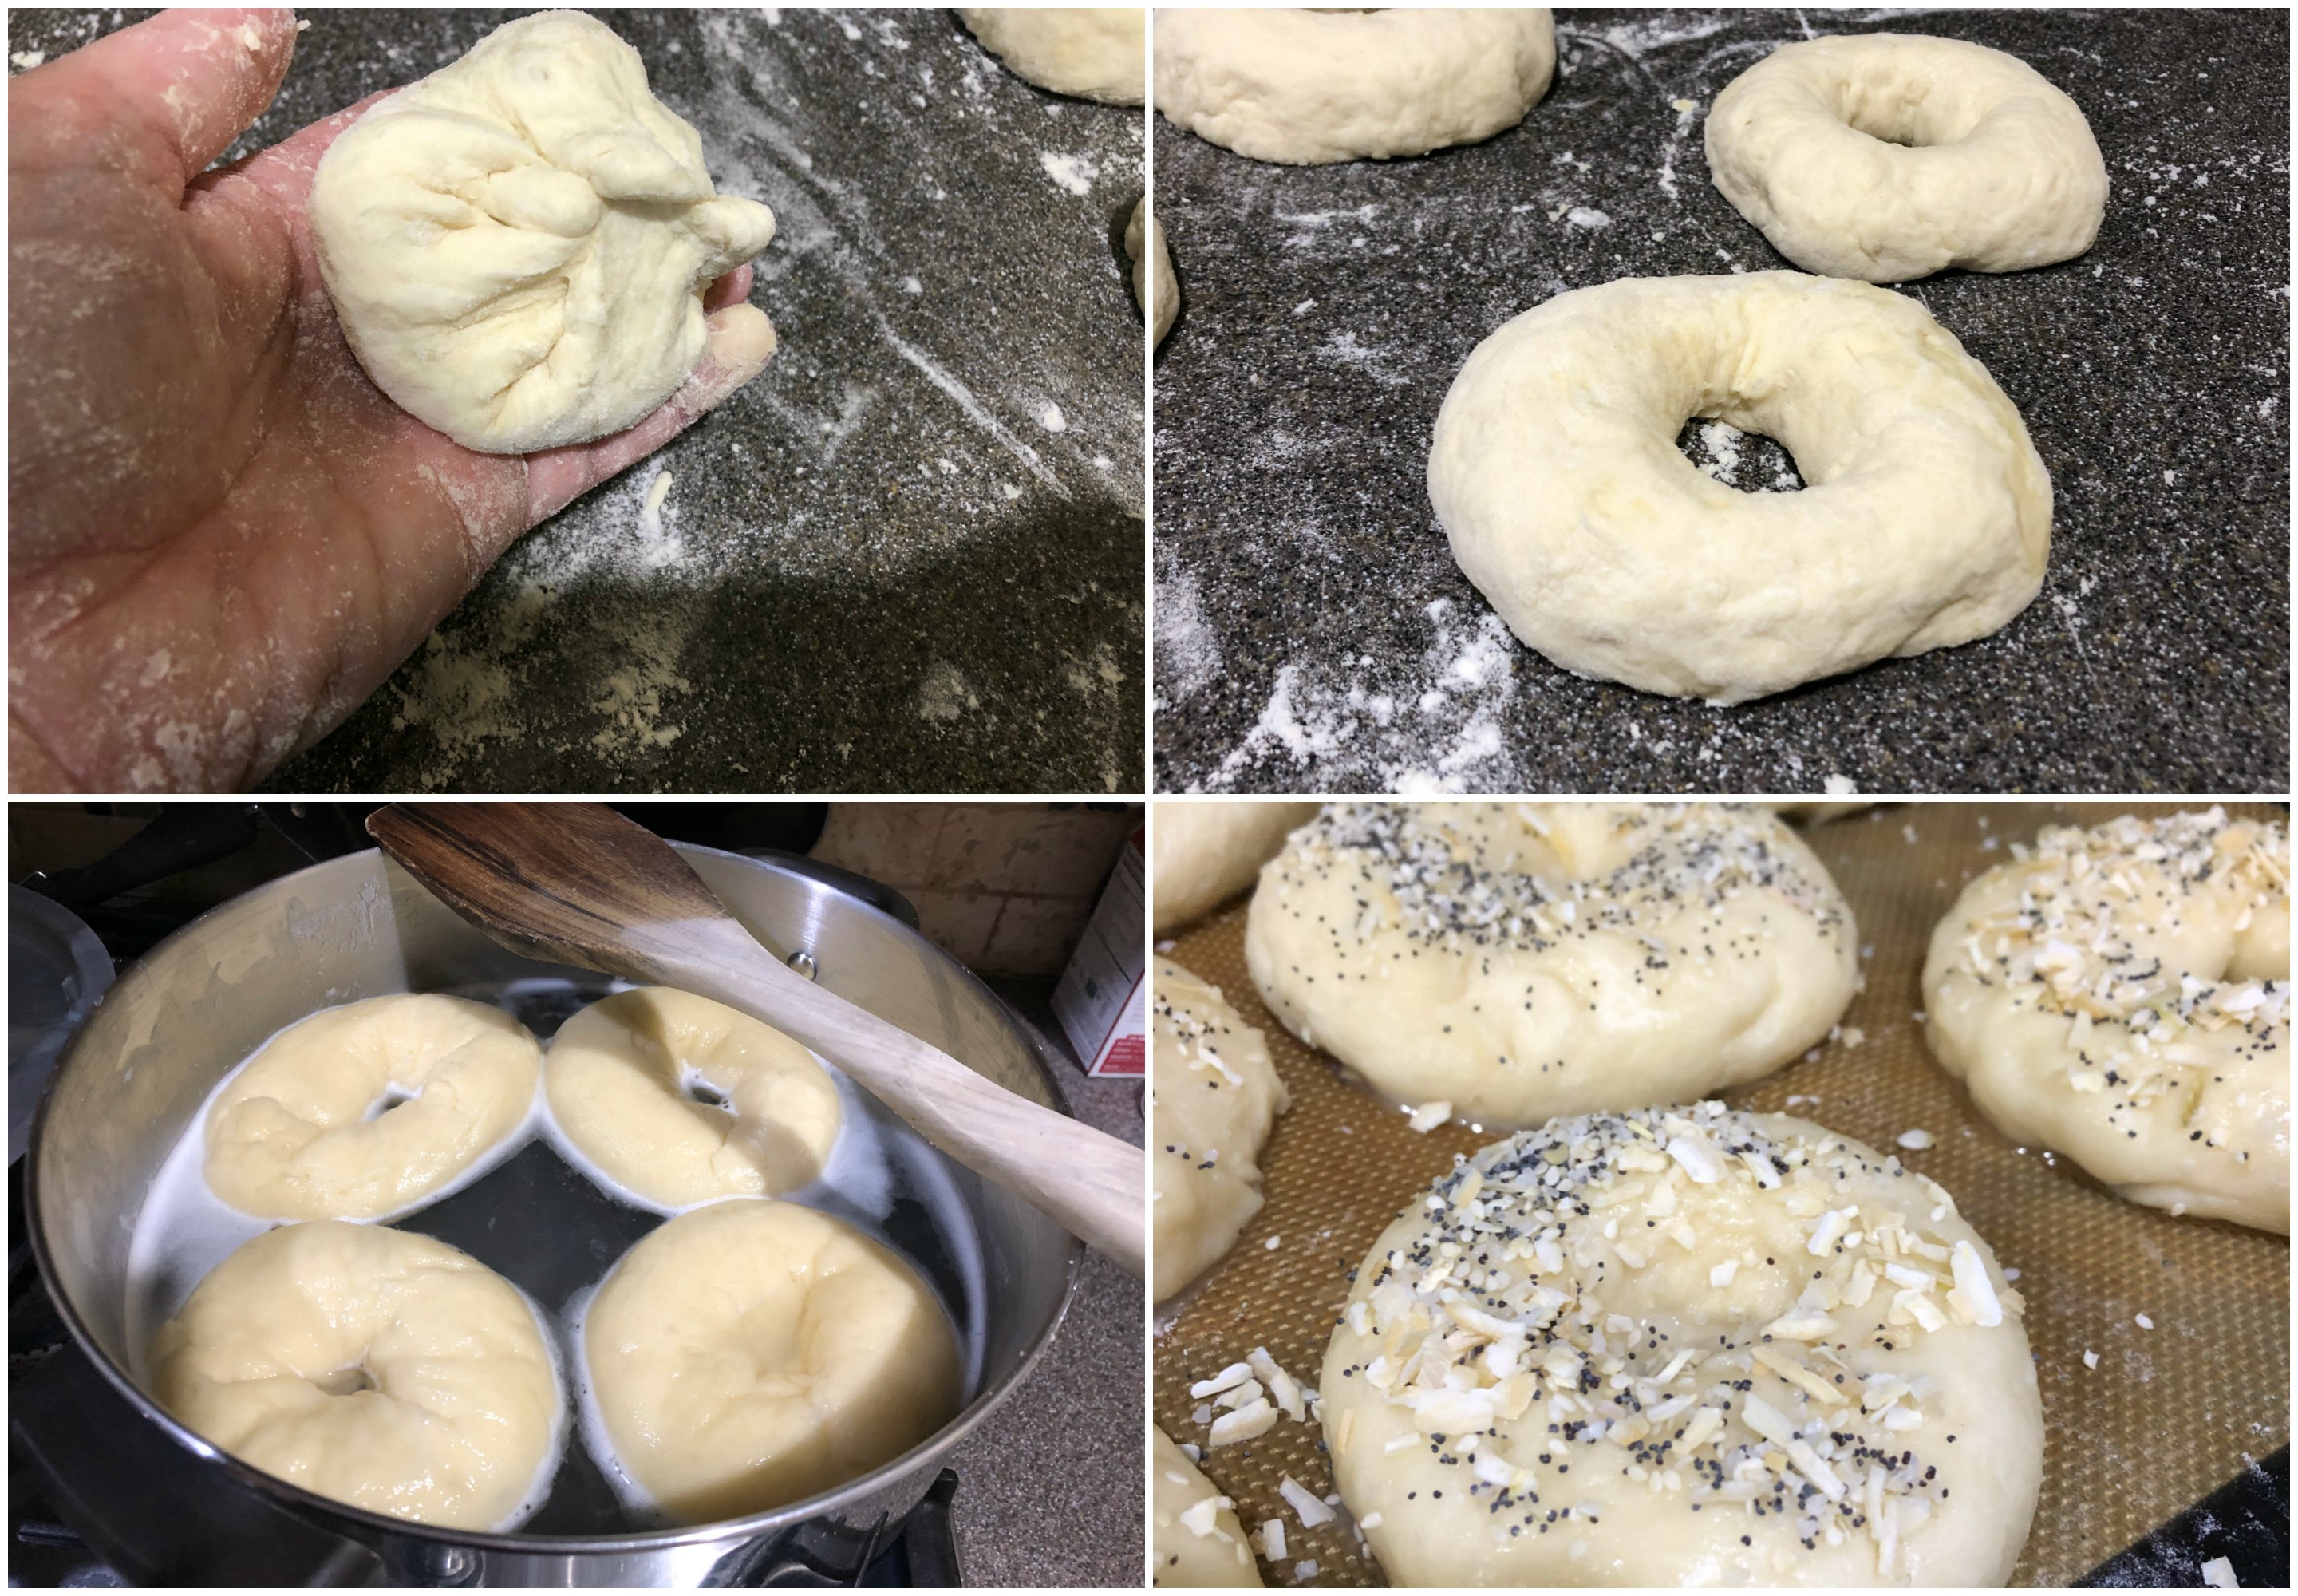 Boil the bagels \ Easy homemade sourdough bagels you can make at home with your own active sourdough starter. This step by step tutorial makes the most delicious bagels!